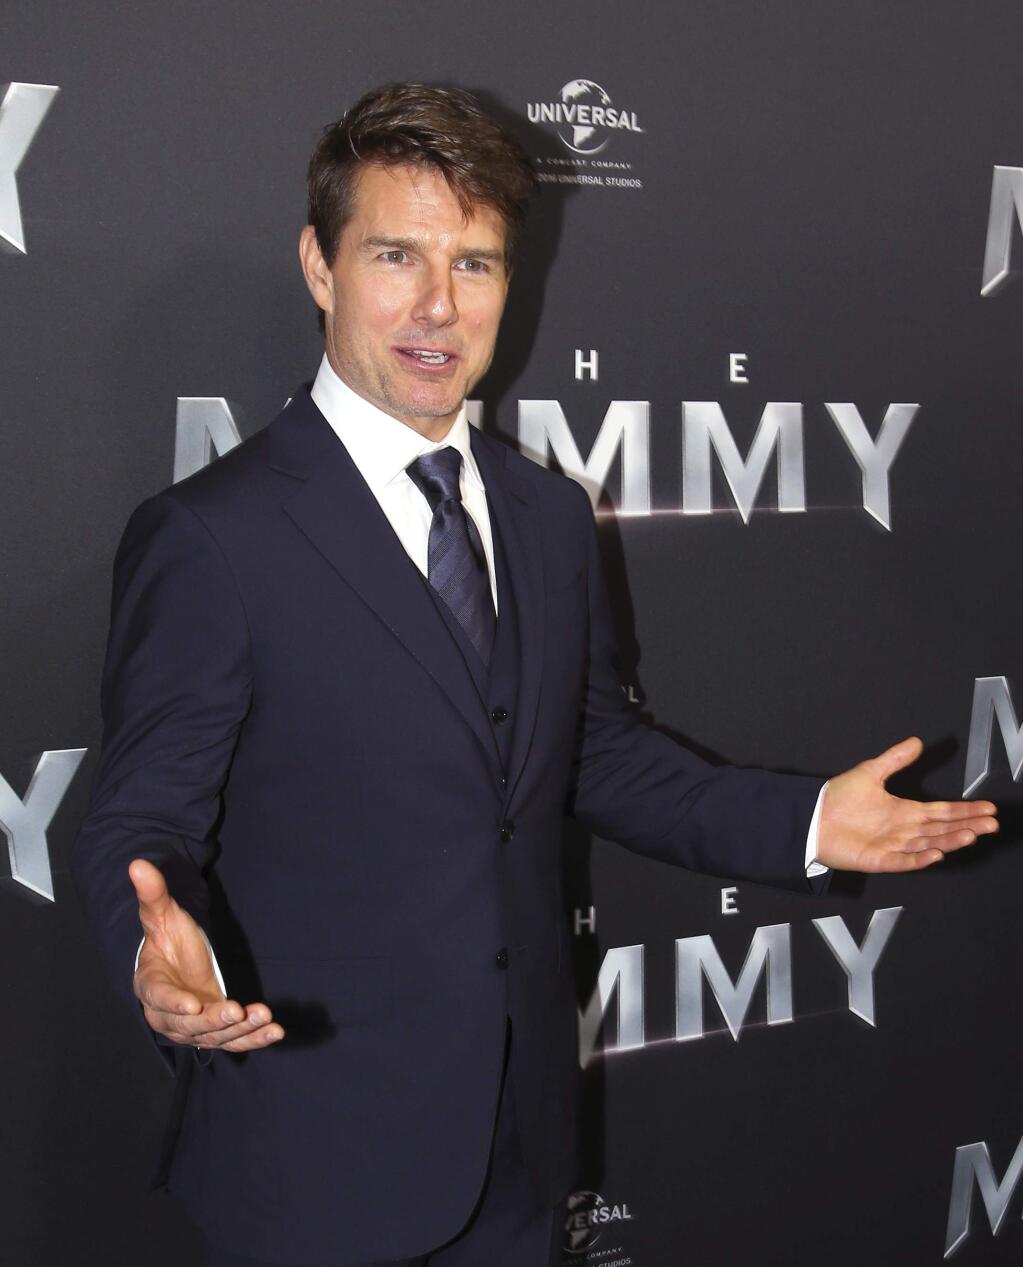 FILE - In this May 22, 2017, file photo, actor Tom Cruise arrives for the Australian premiere of his movie 'The Mummy' in Sydney, Australia. The 54-year-old actor says the long-discussed sequel to 'Top Gun' is a sure thing and should start shooting soon. He was appearing on the Australian morning news show “Sunrise” on Wednesday, May 24, 2017, when the anchors asked about it. (AP Photo/Rick Rycroft, File)